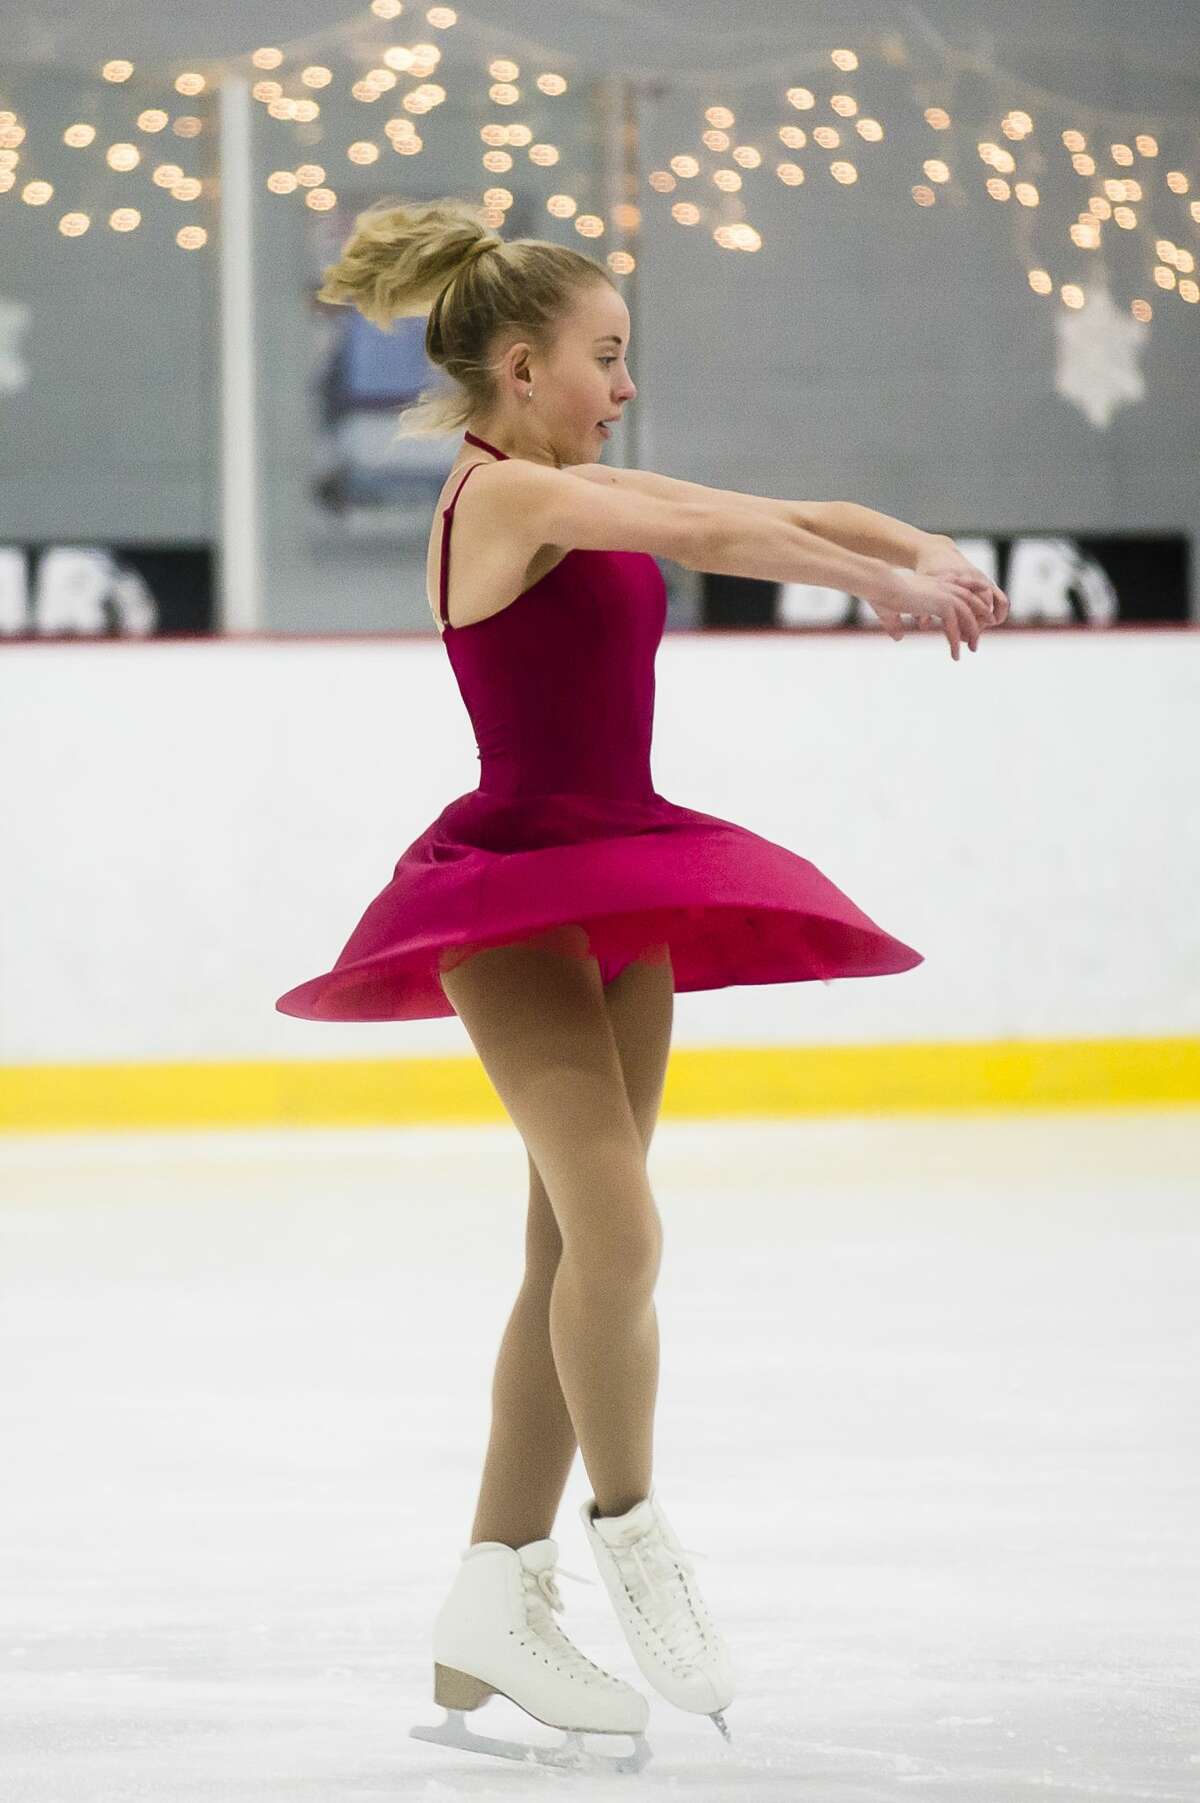 Kabela Hewitt performs during the Holiday Spectacular on Ice, presented by the Midland Figure Skating Club, Saturday, Dec. 21, 2019 at Midland Civic Arena. (Katy Kildee/kkildee@mdn.net)